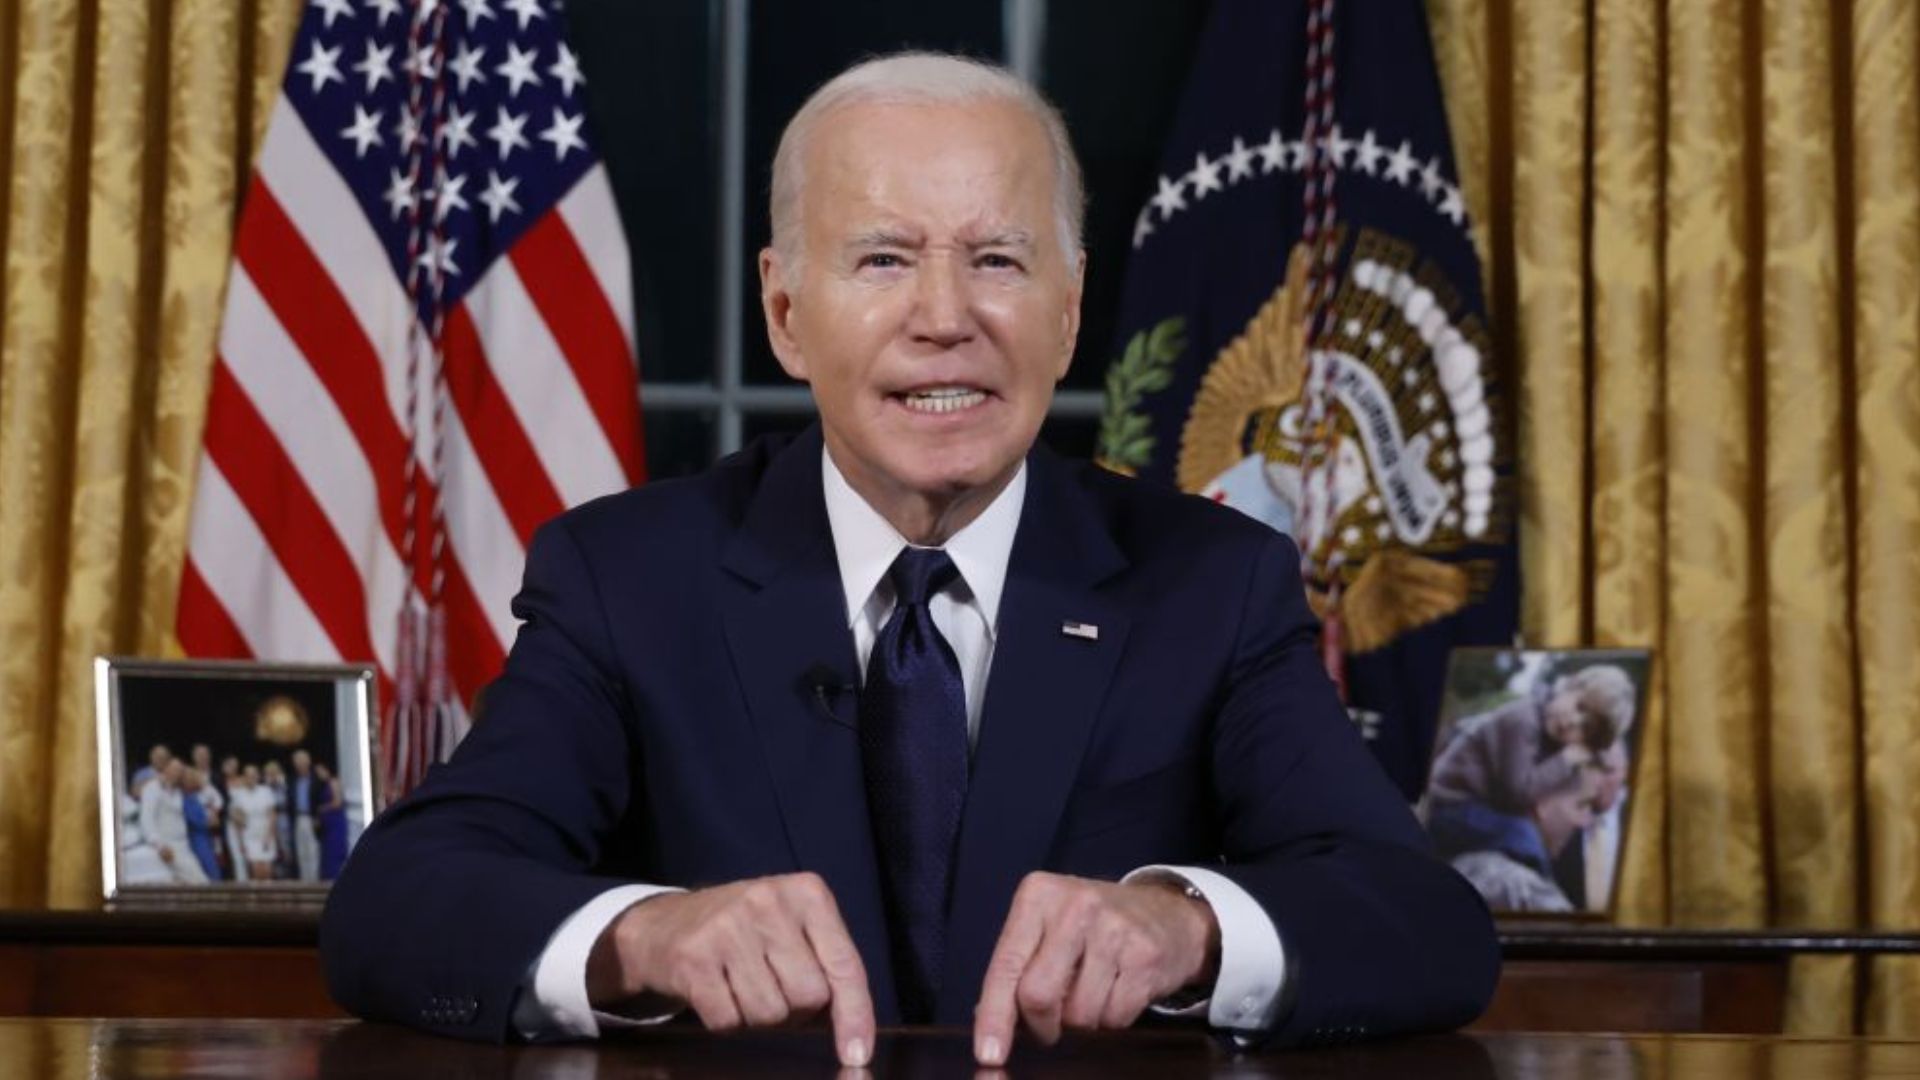 President Joe Biden, wearing a navy suit, sits at the Oval Office desk with the American flag and the presidential seal flag in the background